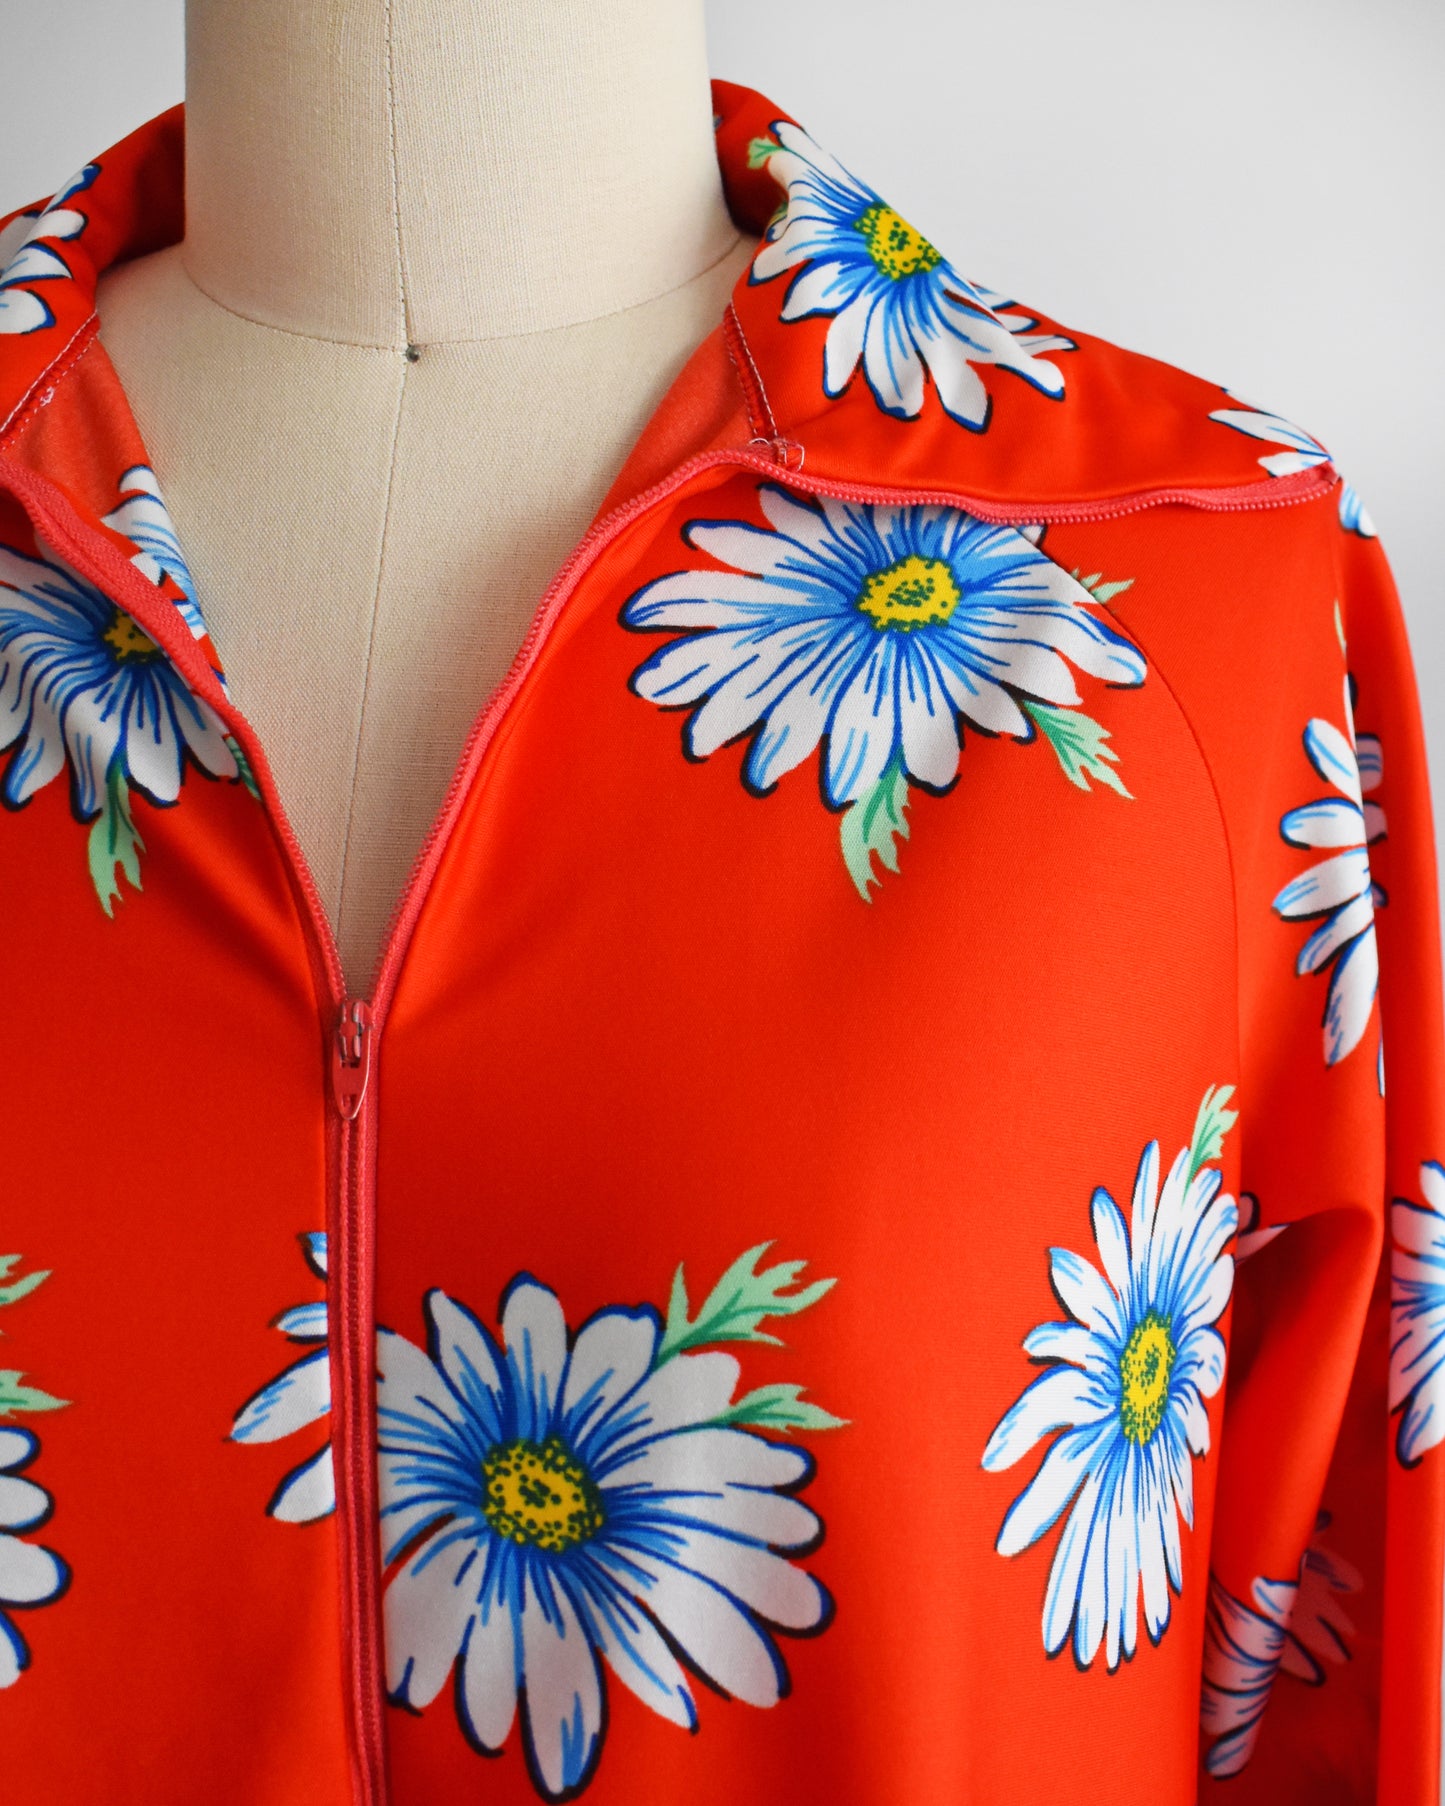 Close up of the collar, floral print, and zipper on the red house dress